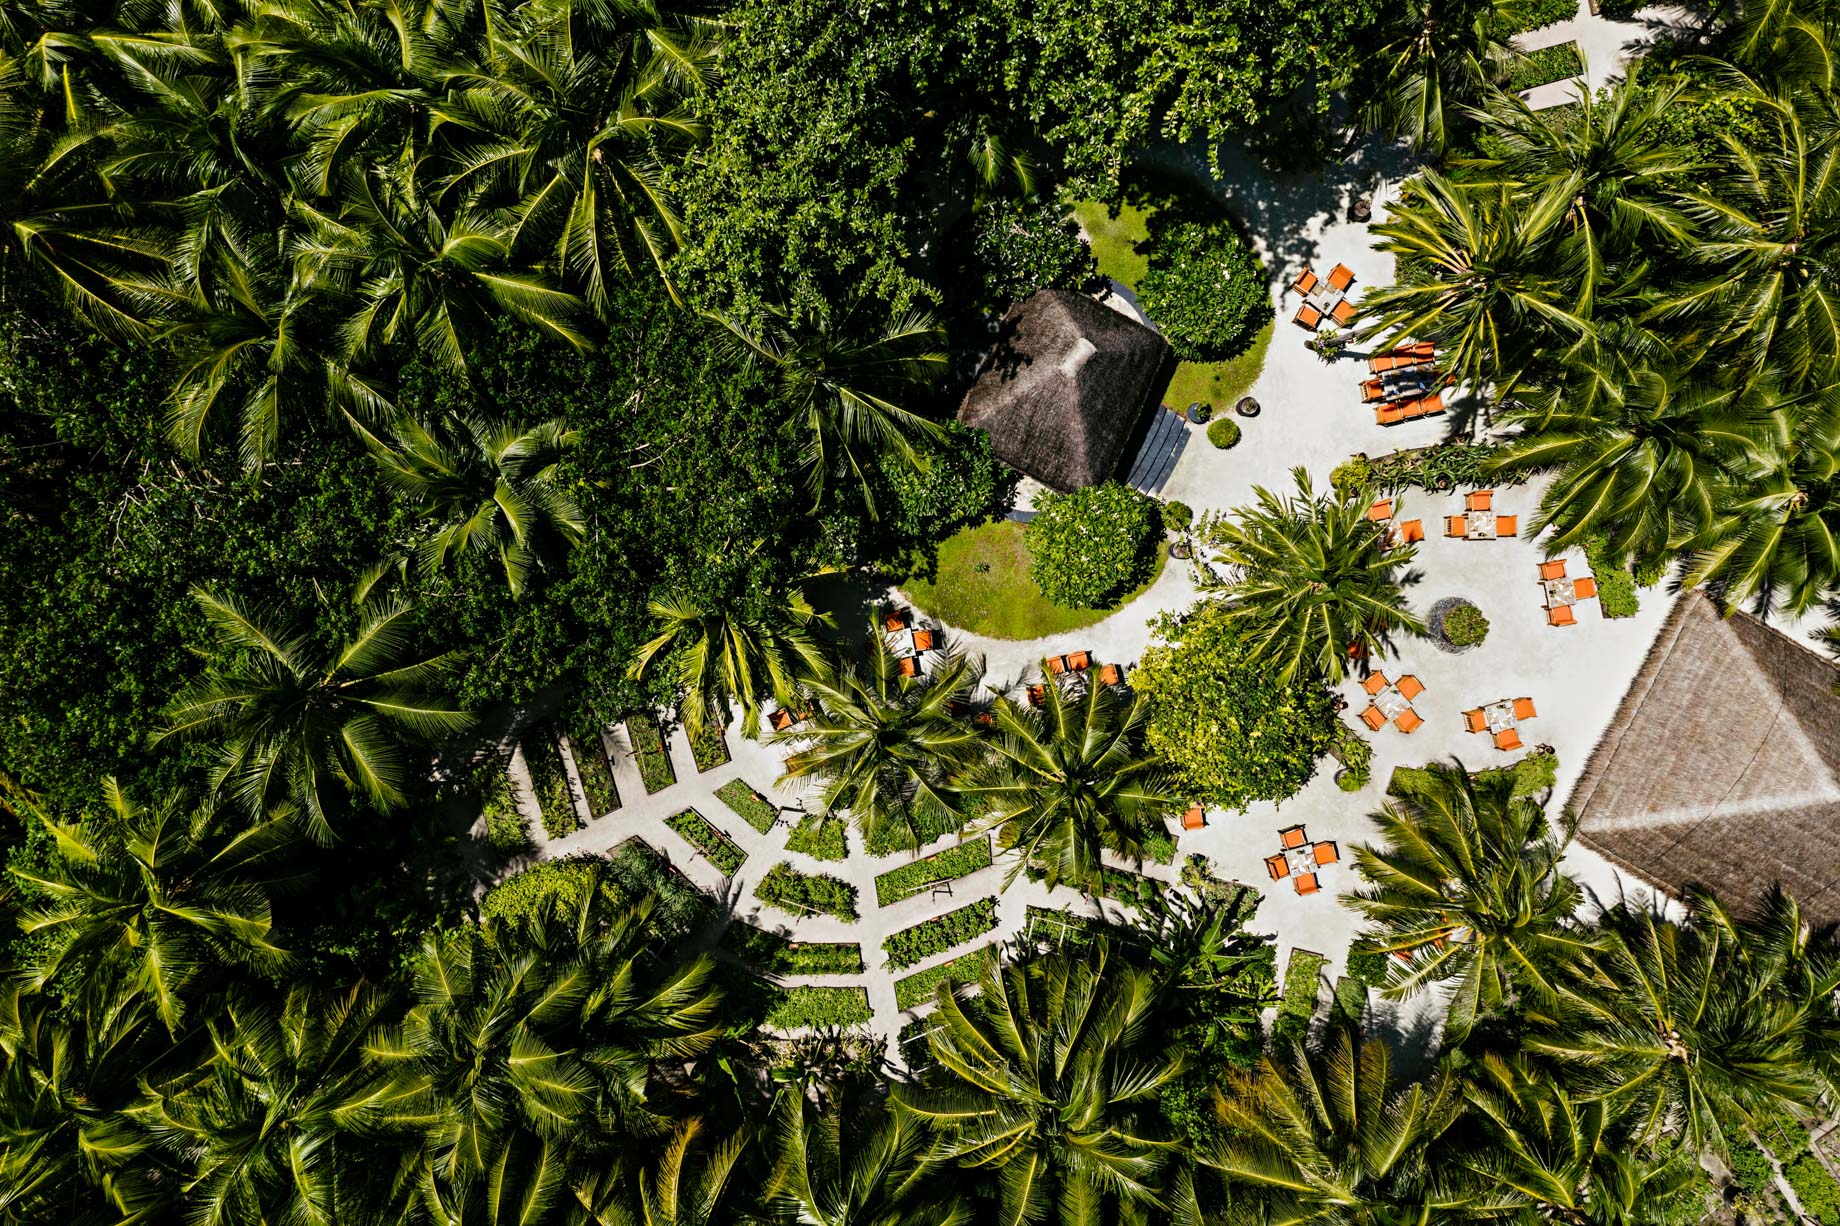 One&Only Reethi Rah Resort – North Male Atoll, Maldives – Botanica Restaurant Overhead View